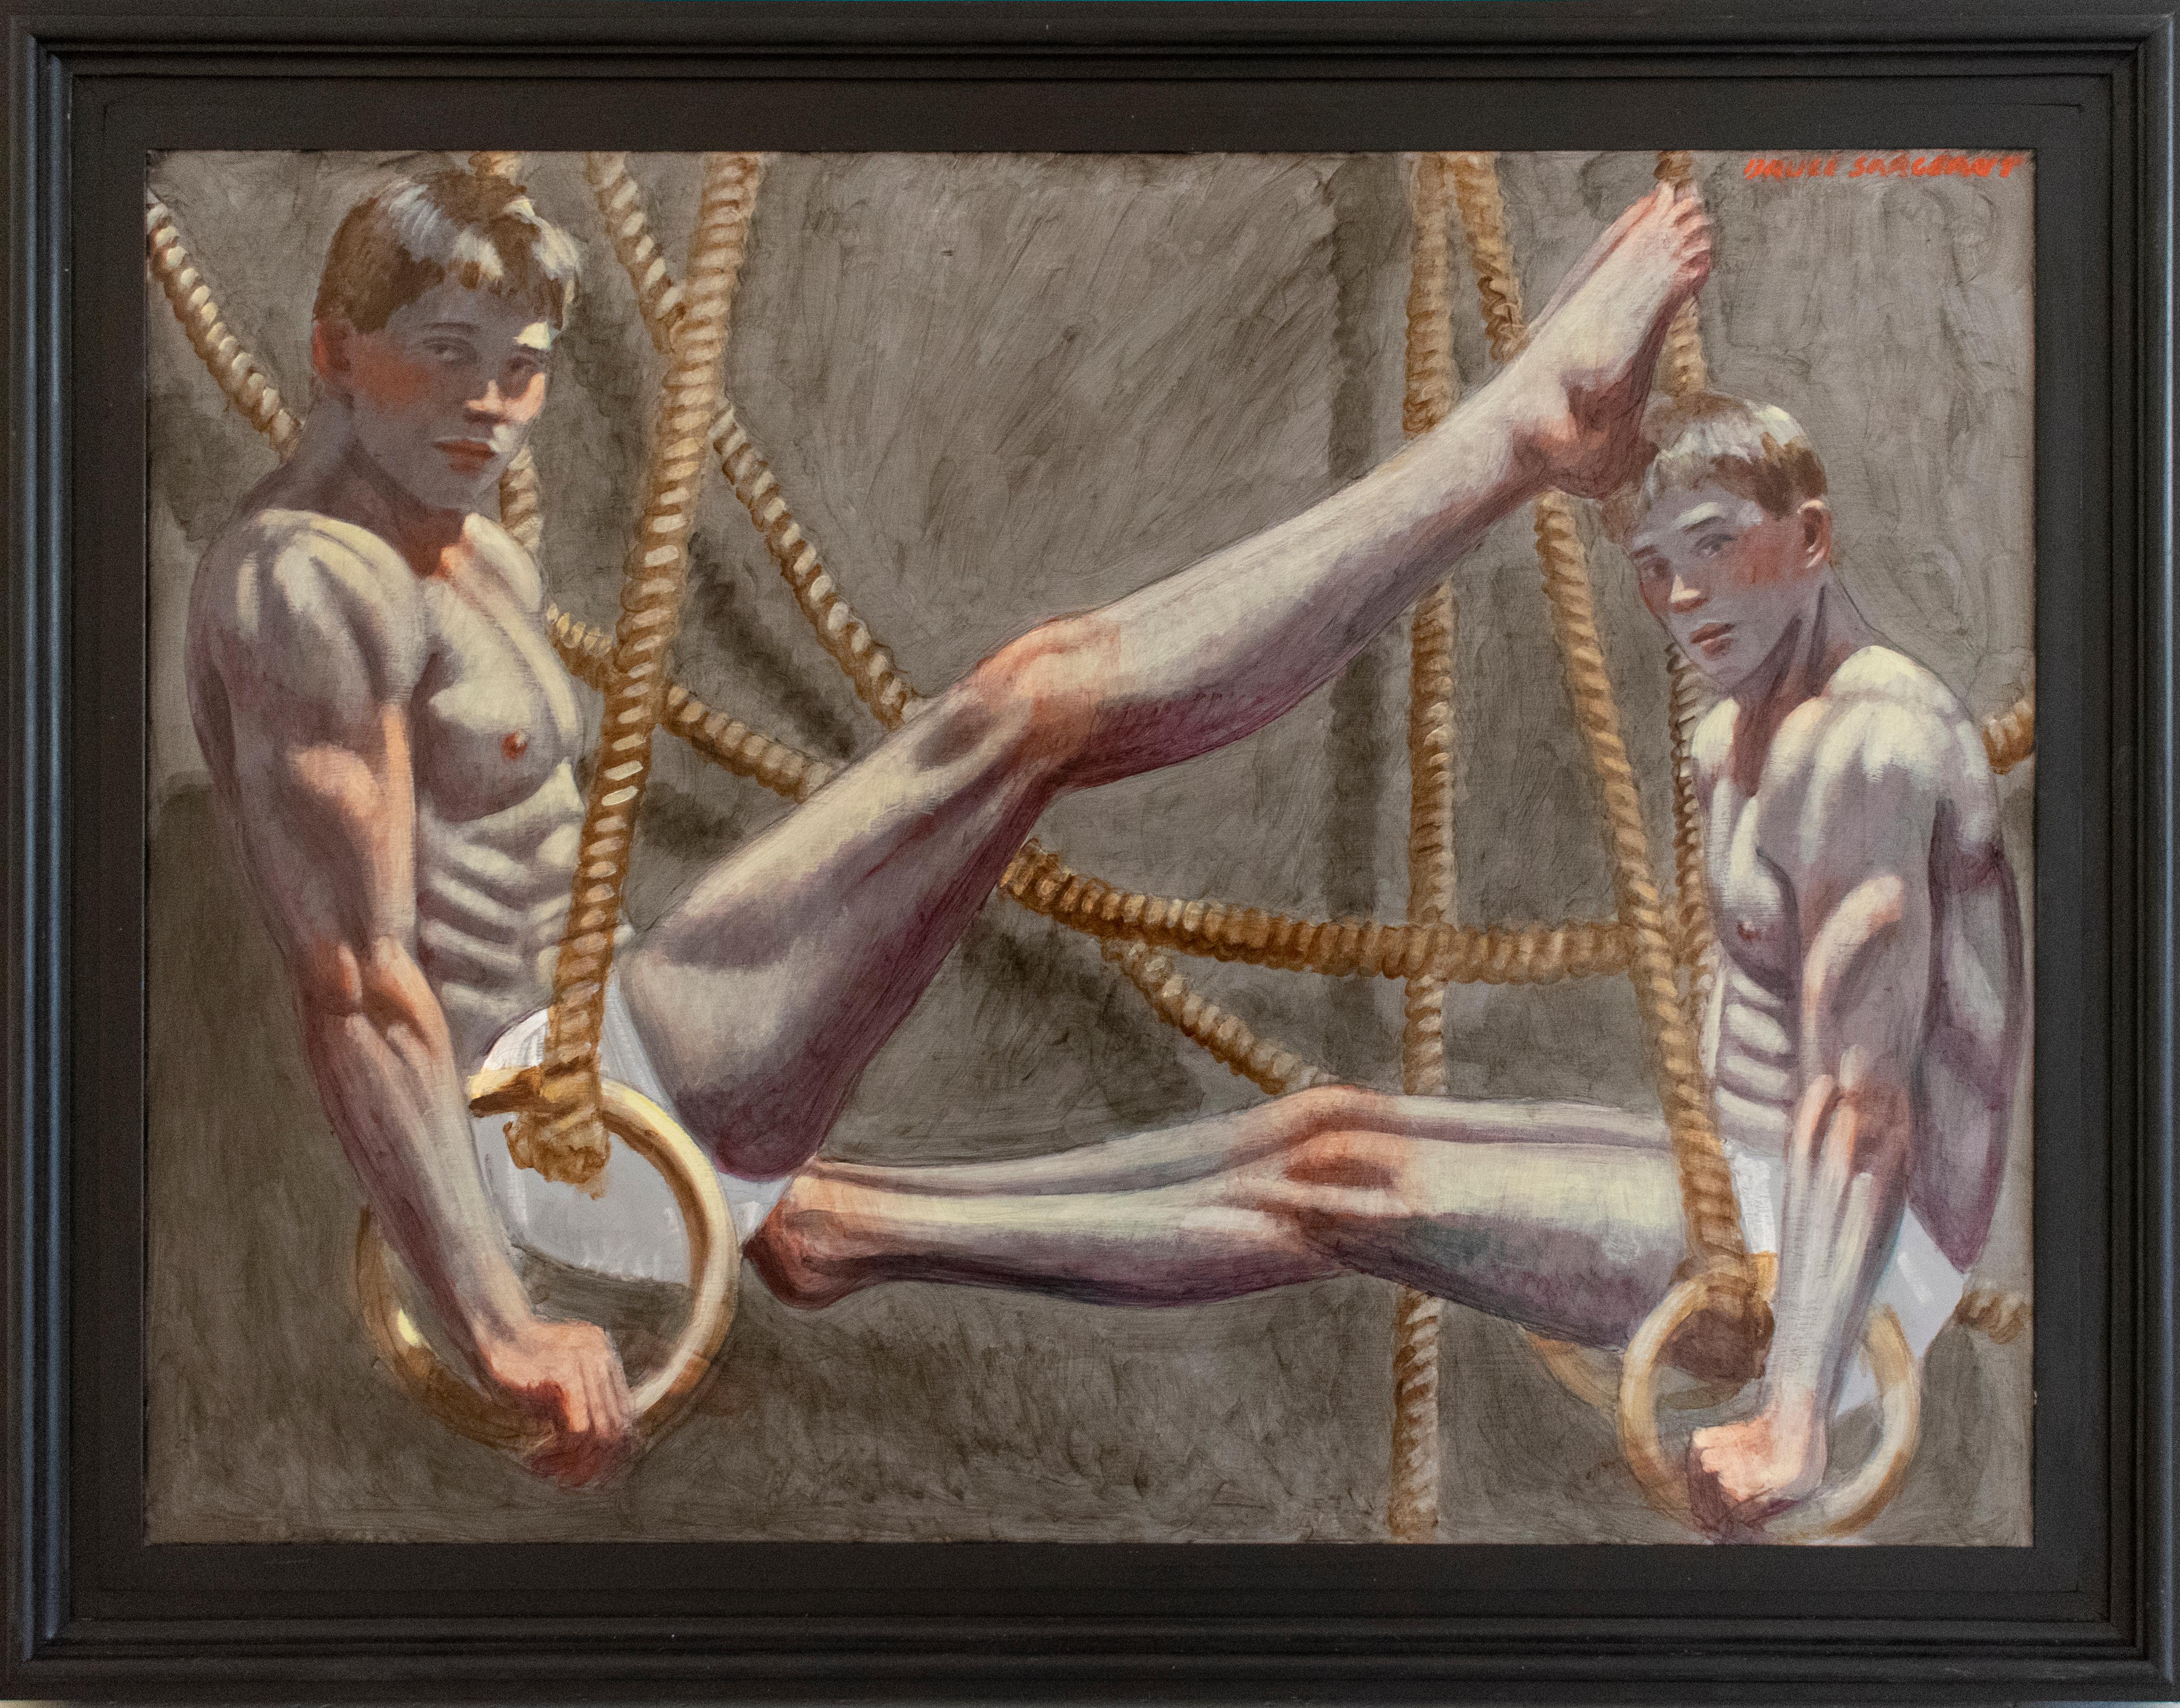 Gymnasts with Rings (Figurative Painting of Two Male Athletes by Mark Beard)